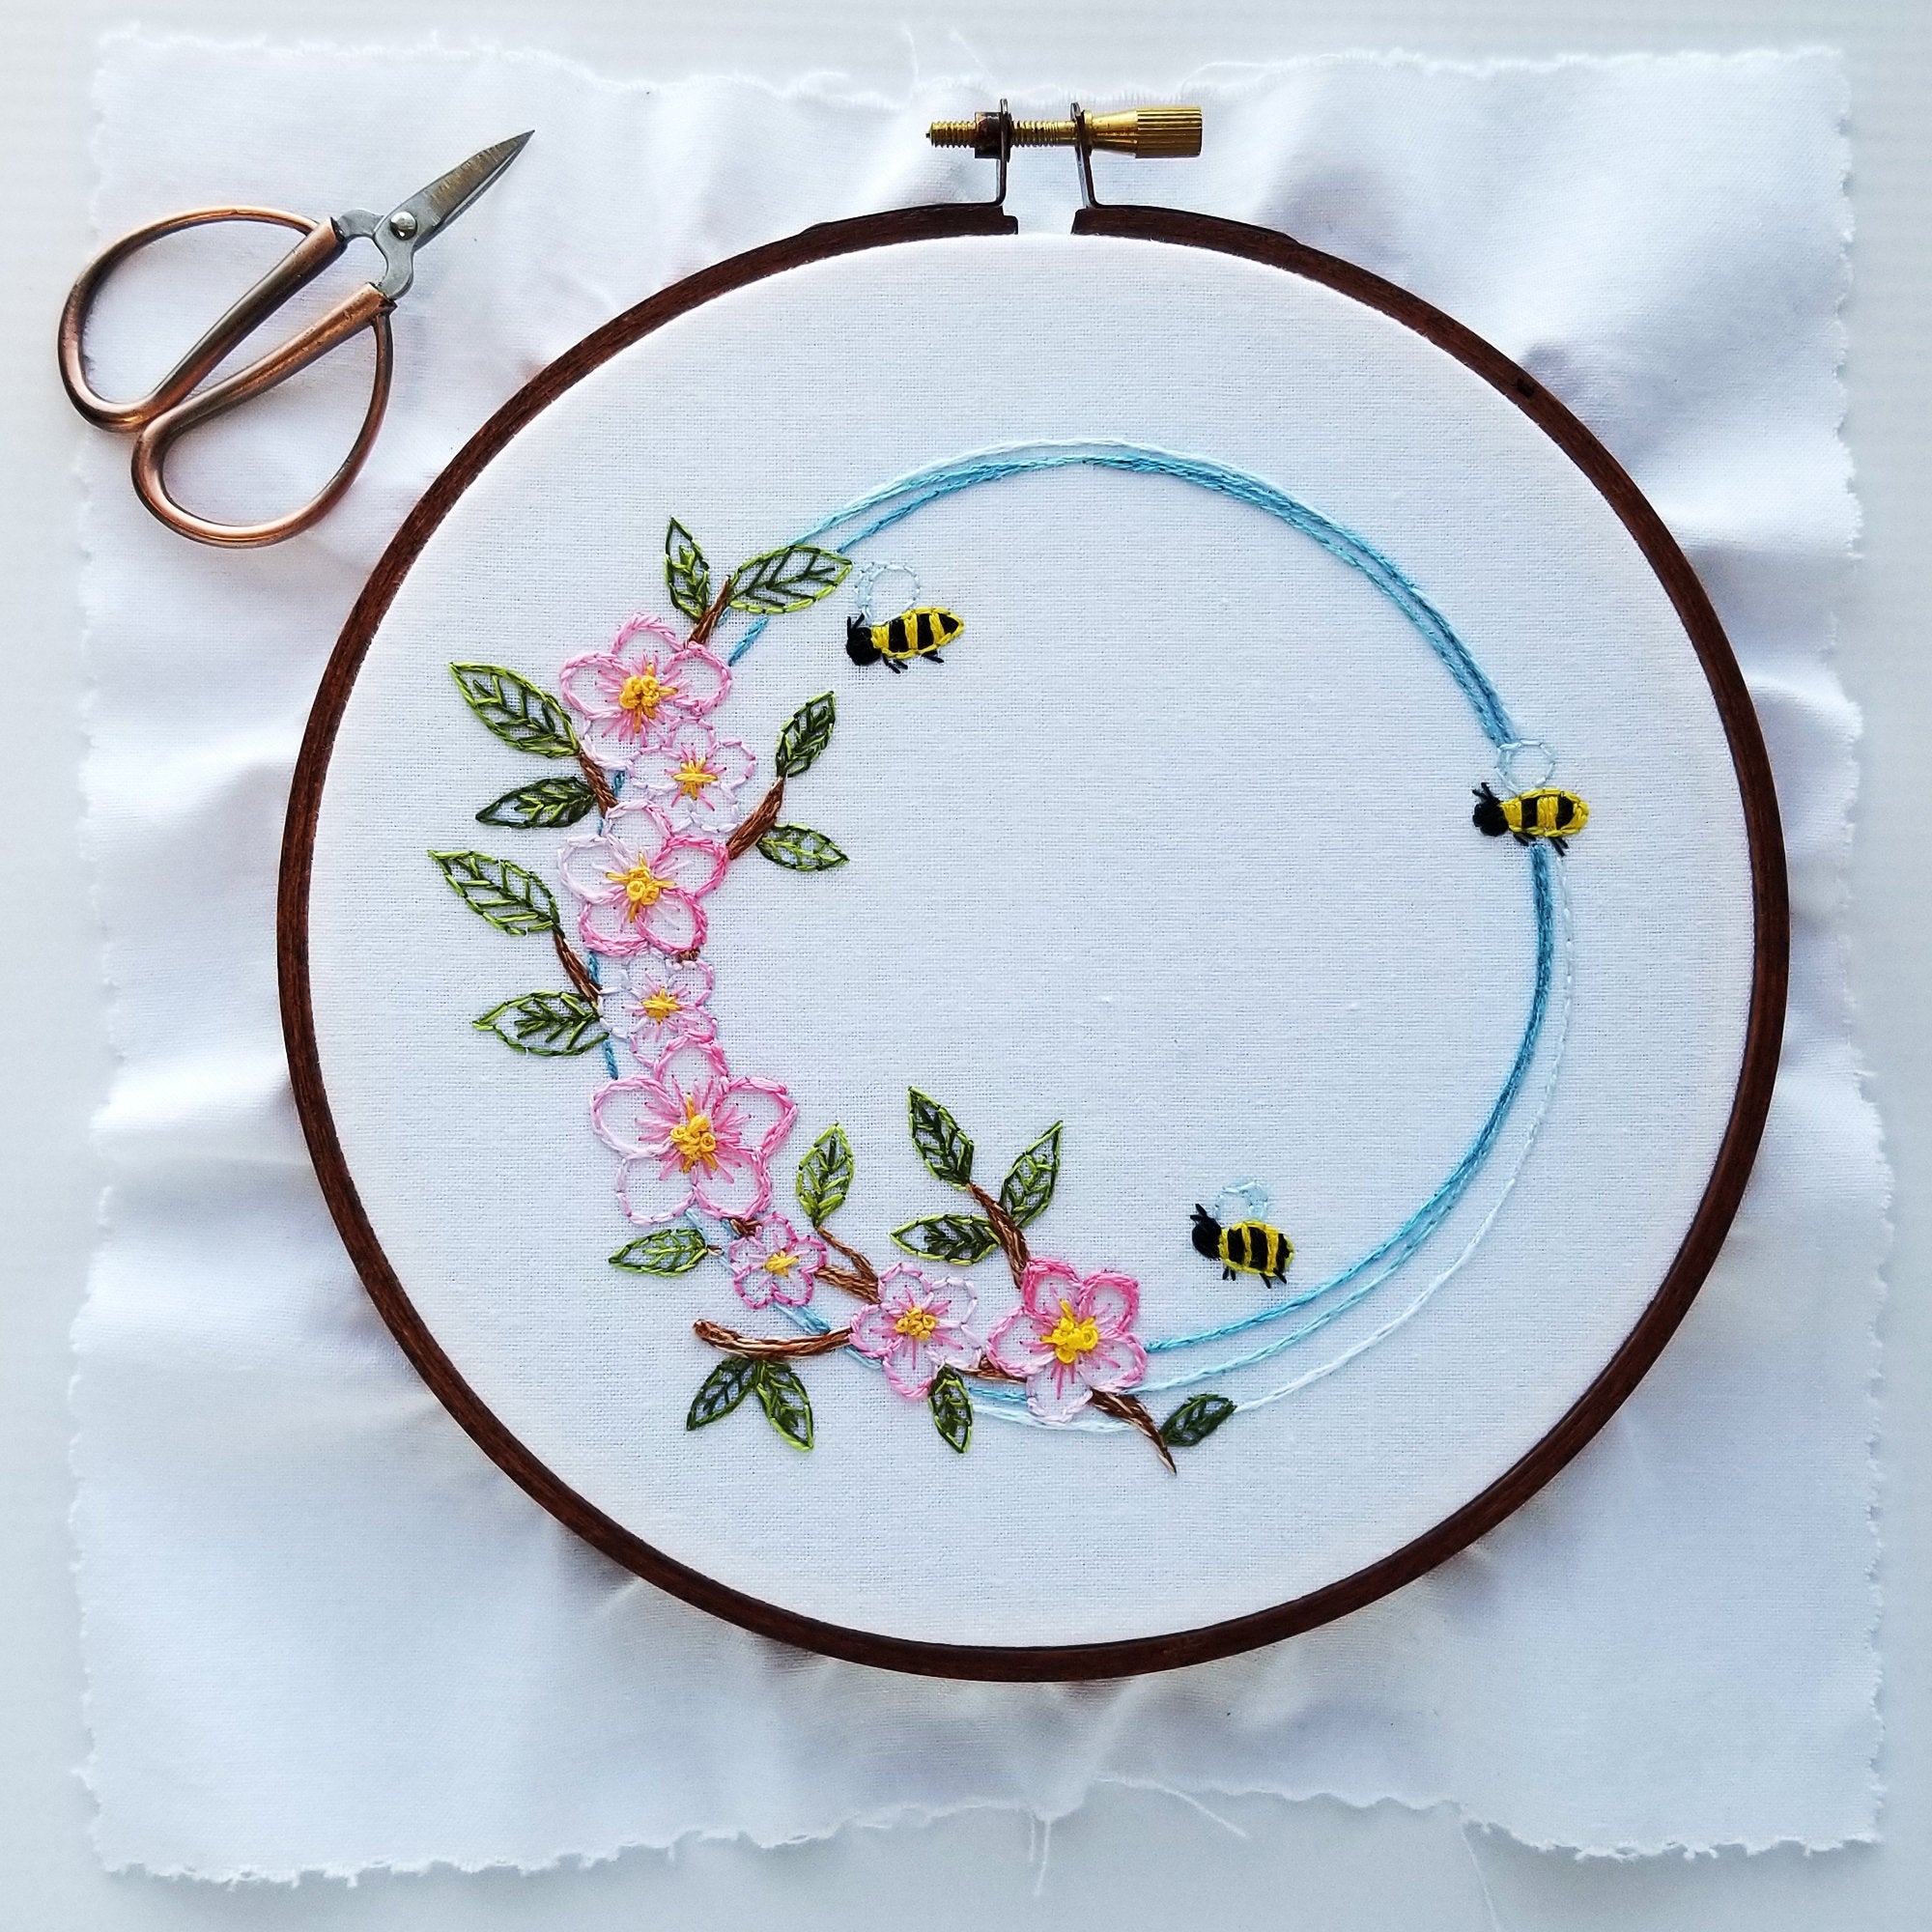 Kit - Apple Blossoms & Honey Bees Hand Embroidery Kit - Beginner Embro -  Wildflower Fox Crafts